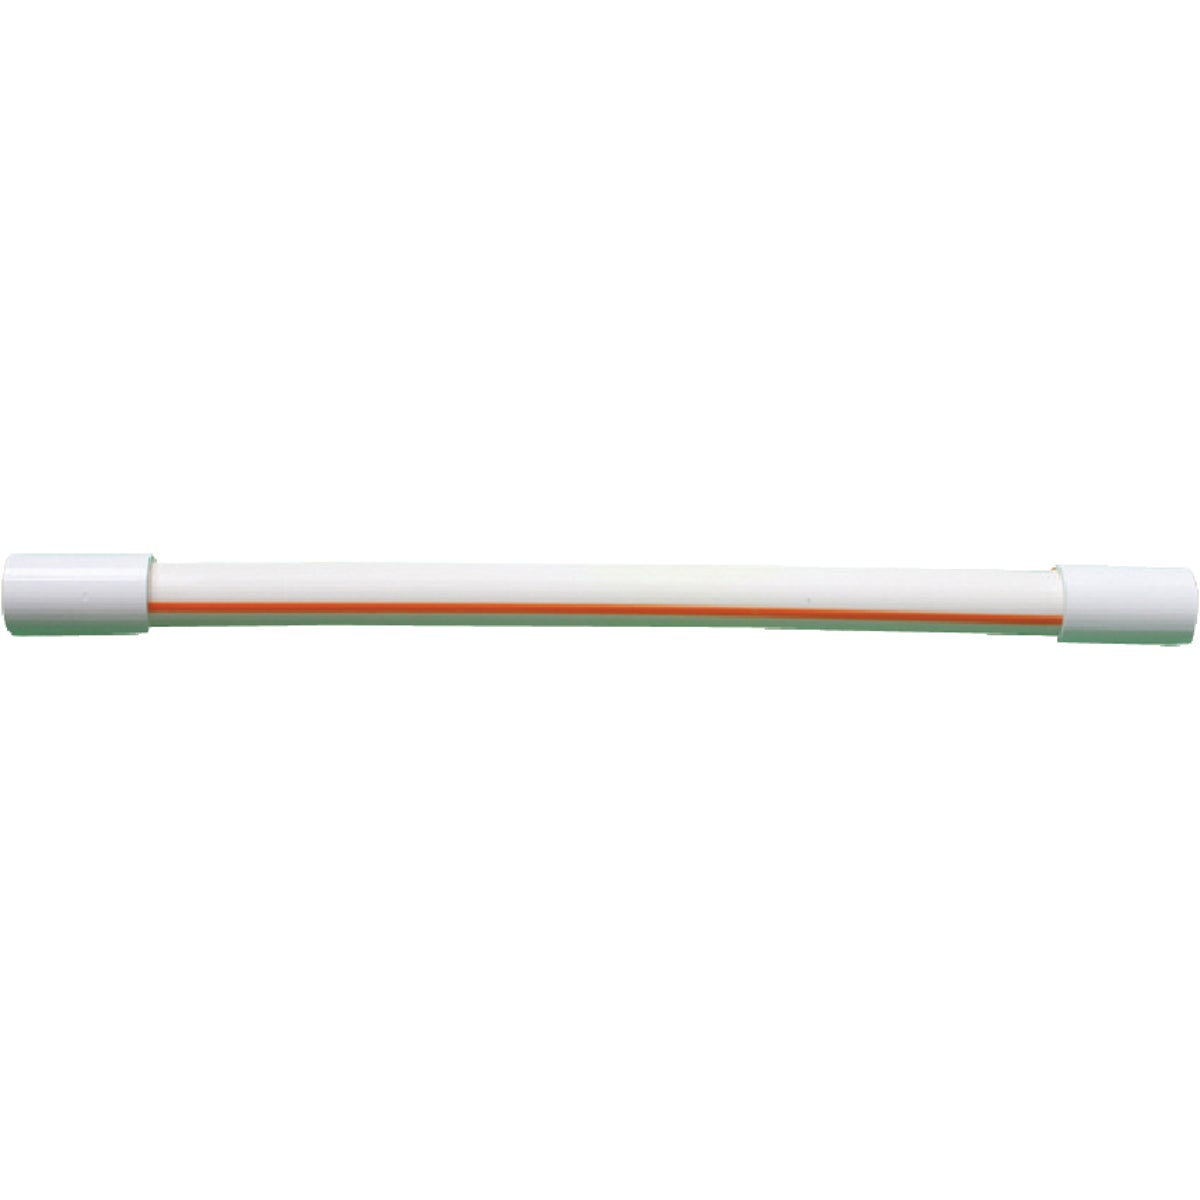 Item 404194, Made from flexible PVC tubing rated at 150 psi (pounds per square inch), 